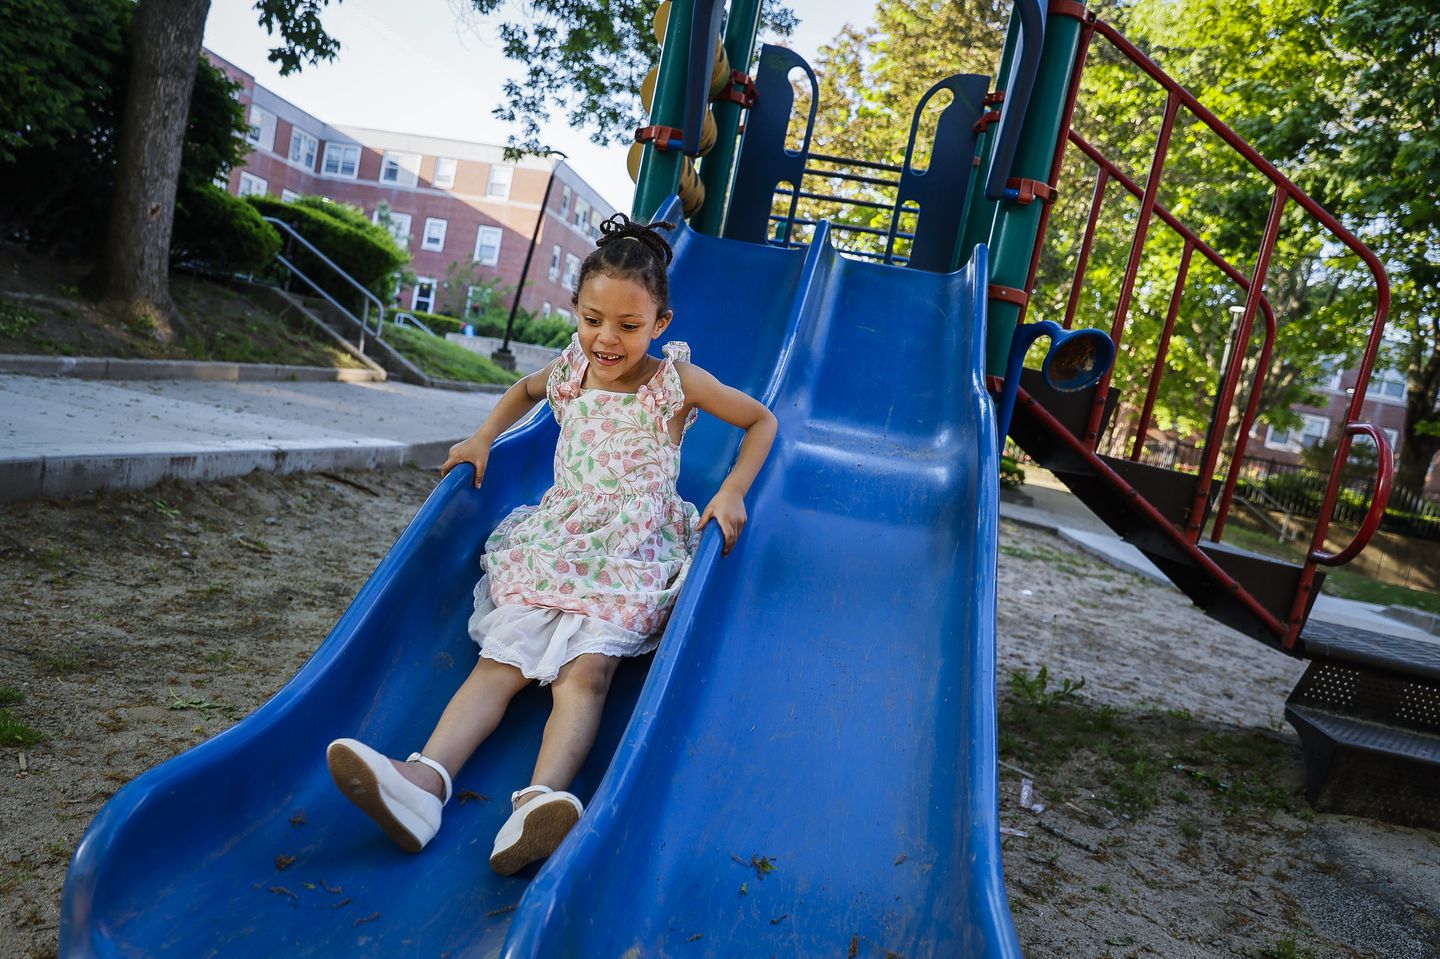 Jaylene Macedo played in the playground near her family’s new Brighton apartment. She, her sister, and mother, Natalia Macedo, were homeless for seven months before they were able to move into an apartment in Brighton.